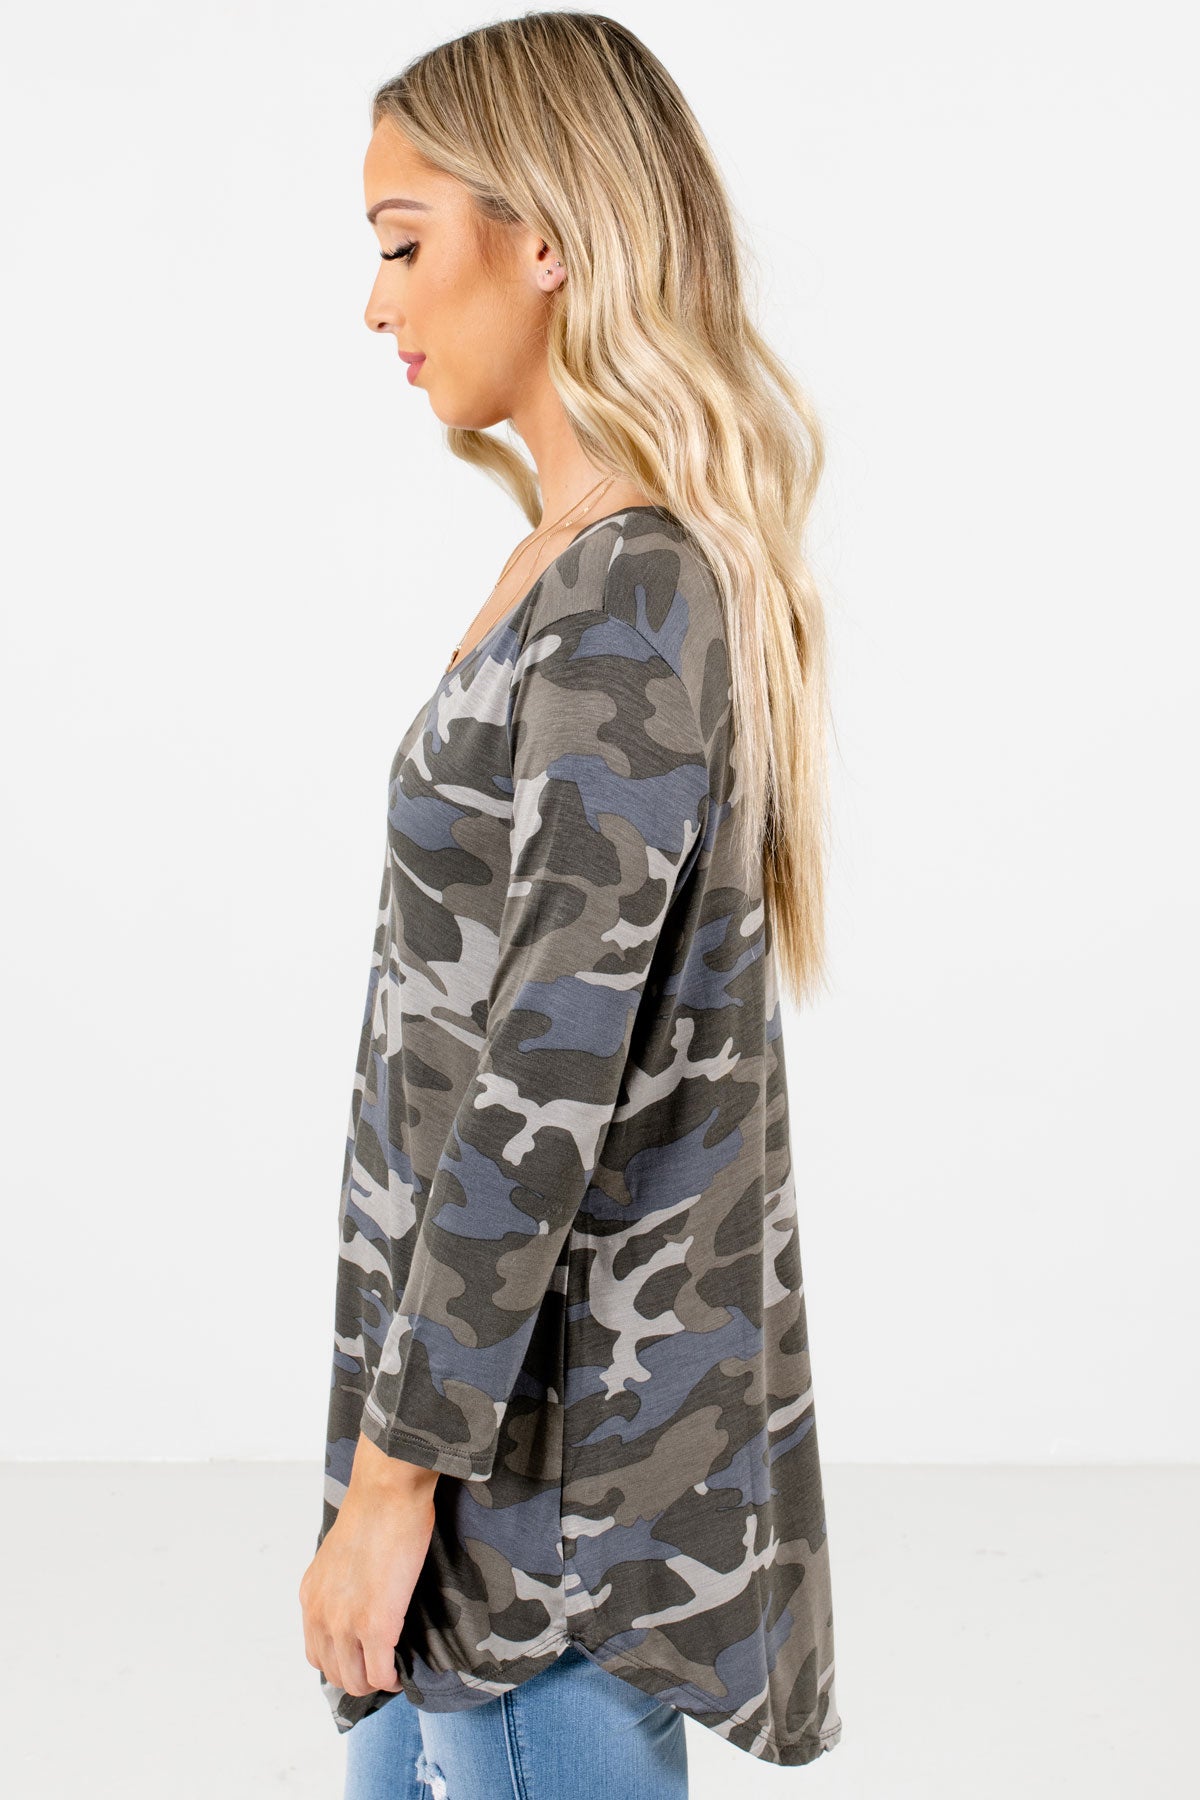 Green Rounded Hem Boutique Tops for Women